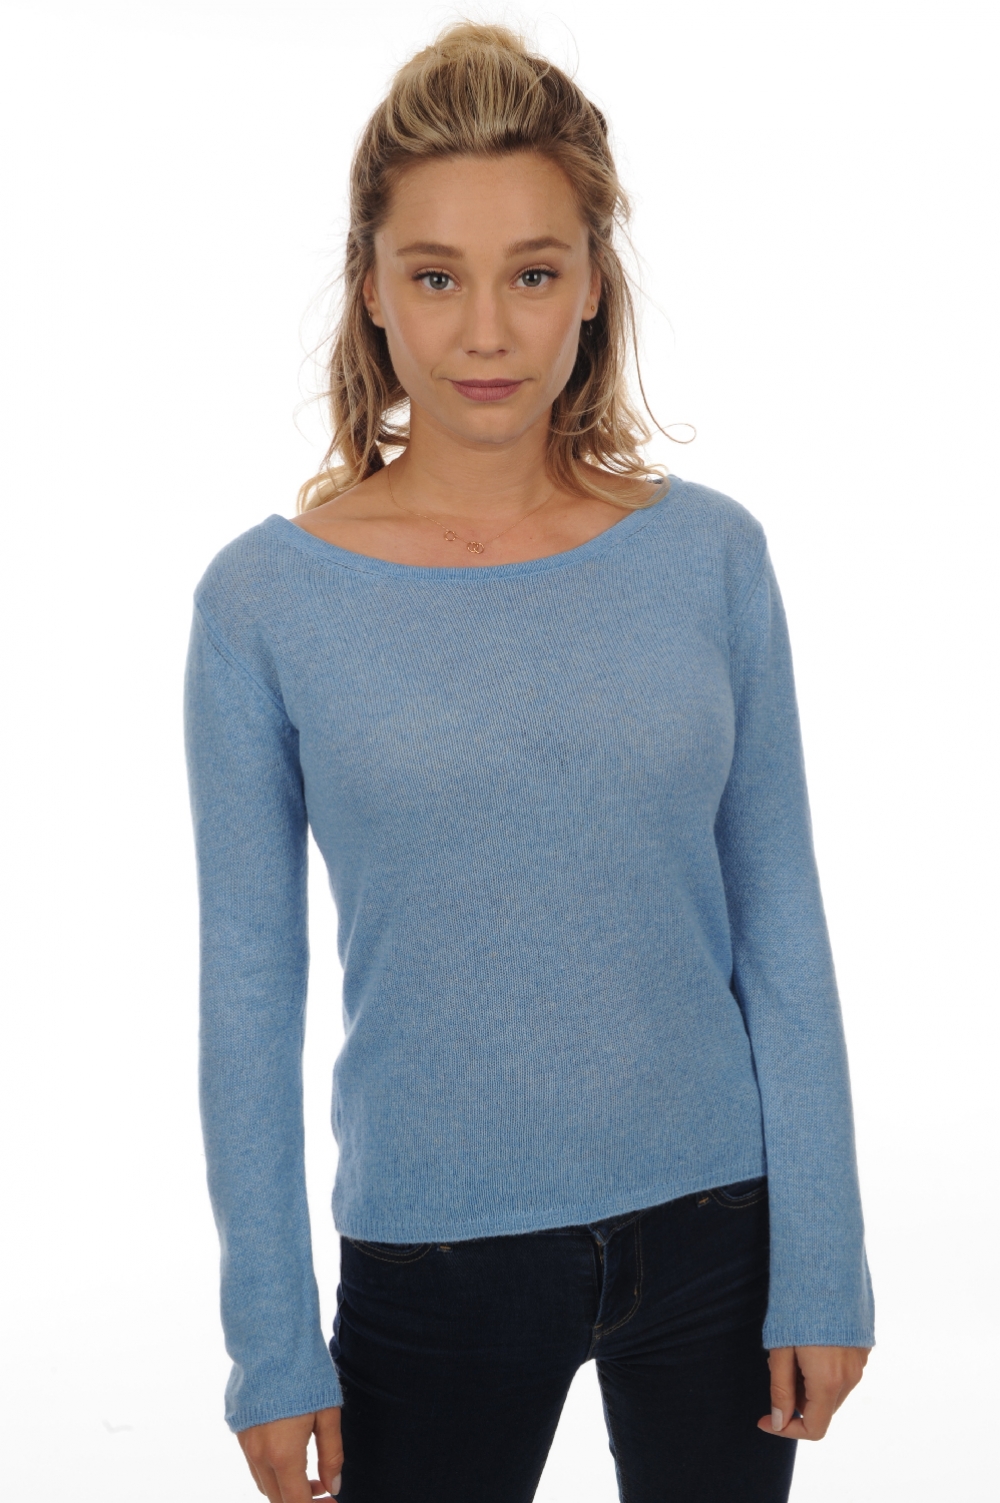 Cashmere ladies basic sweaters at low prices caleen azur blue chine l